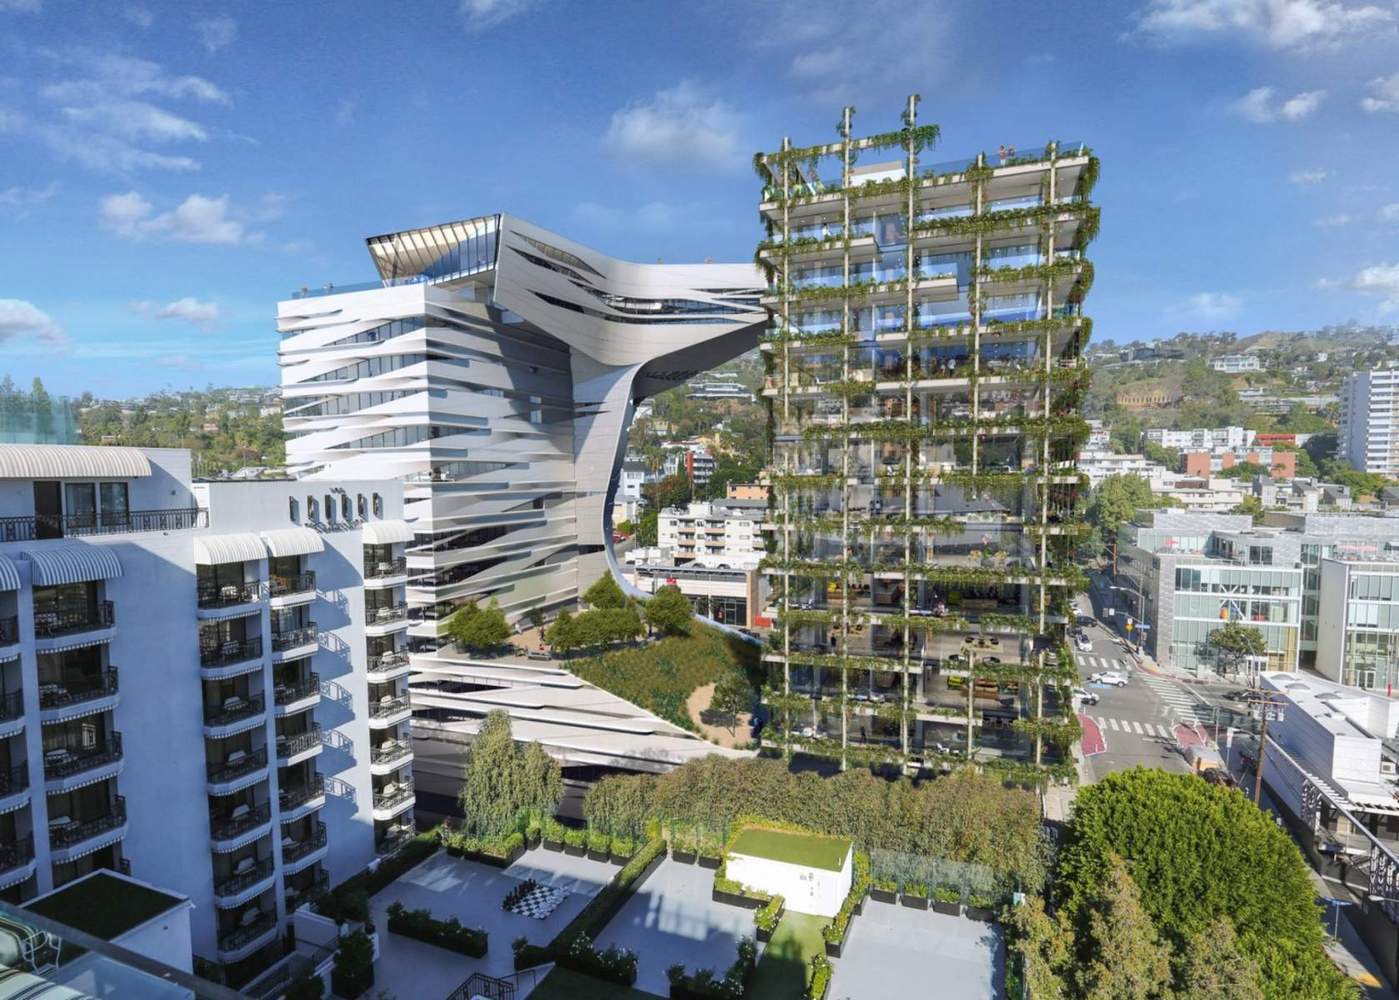 Morphosis Unveils New Images of Viper Room Development for L.A.s Sunset Strip